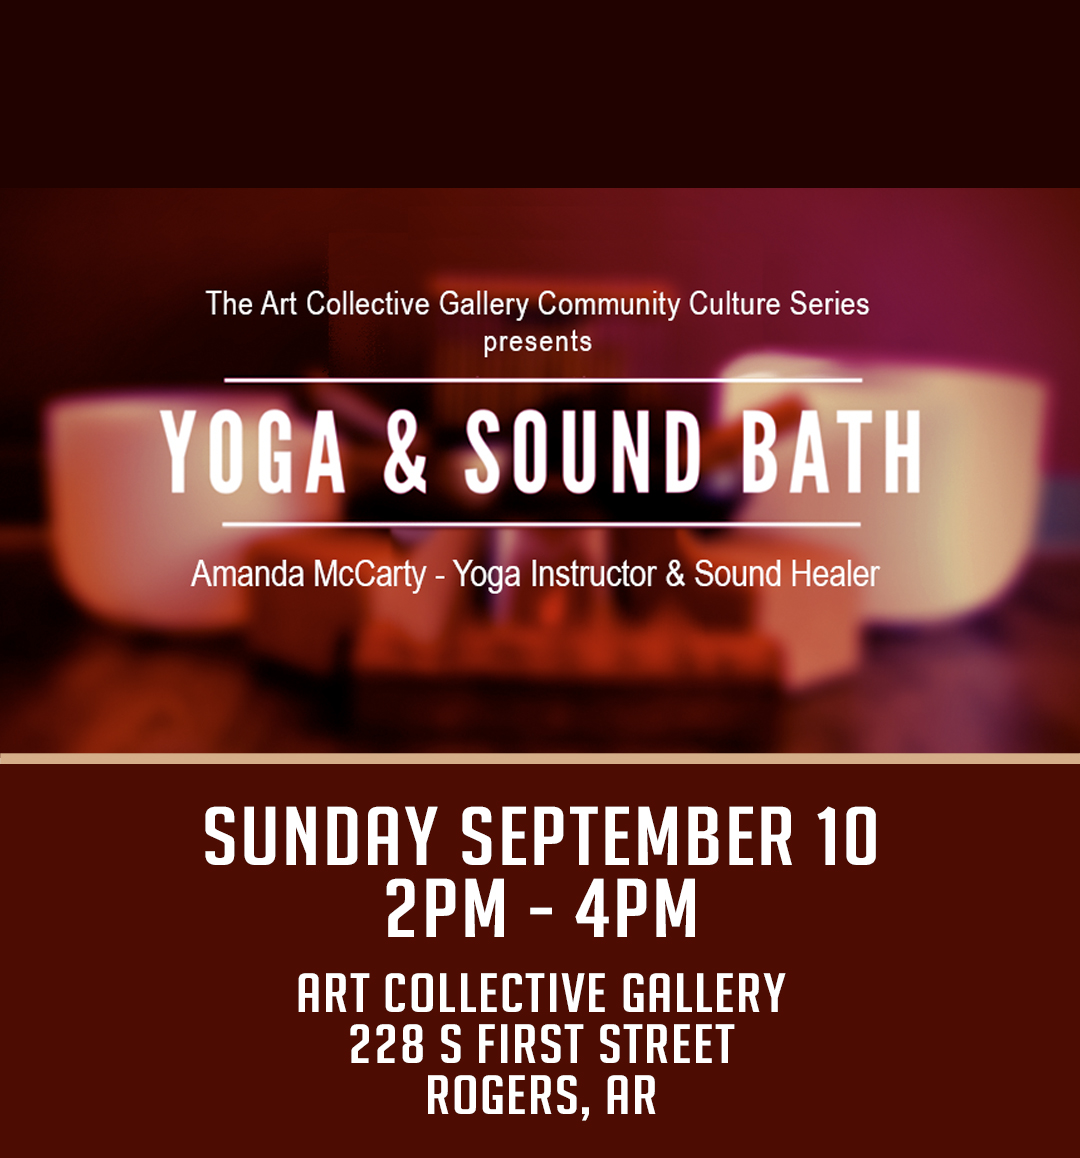 Yoga and Sound Bath - Hosted by Amanda McCarty and the Art Collective Gallery